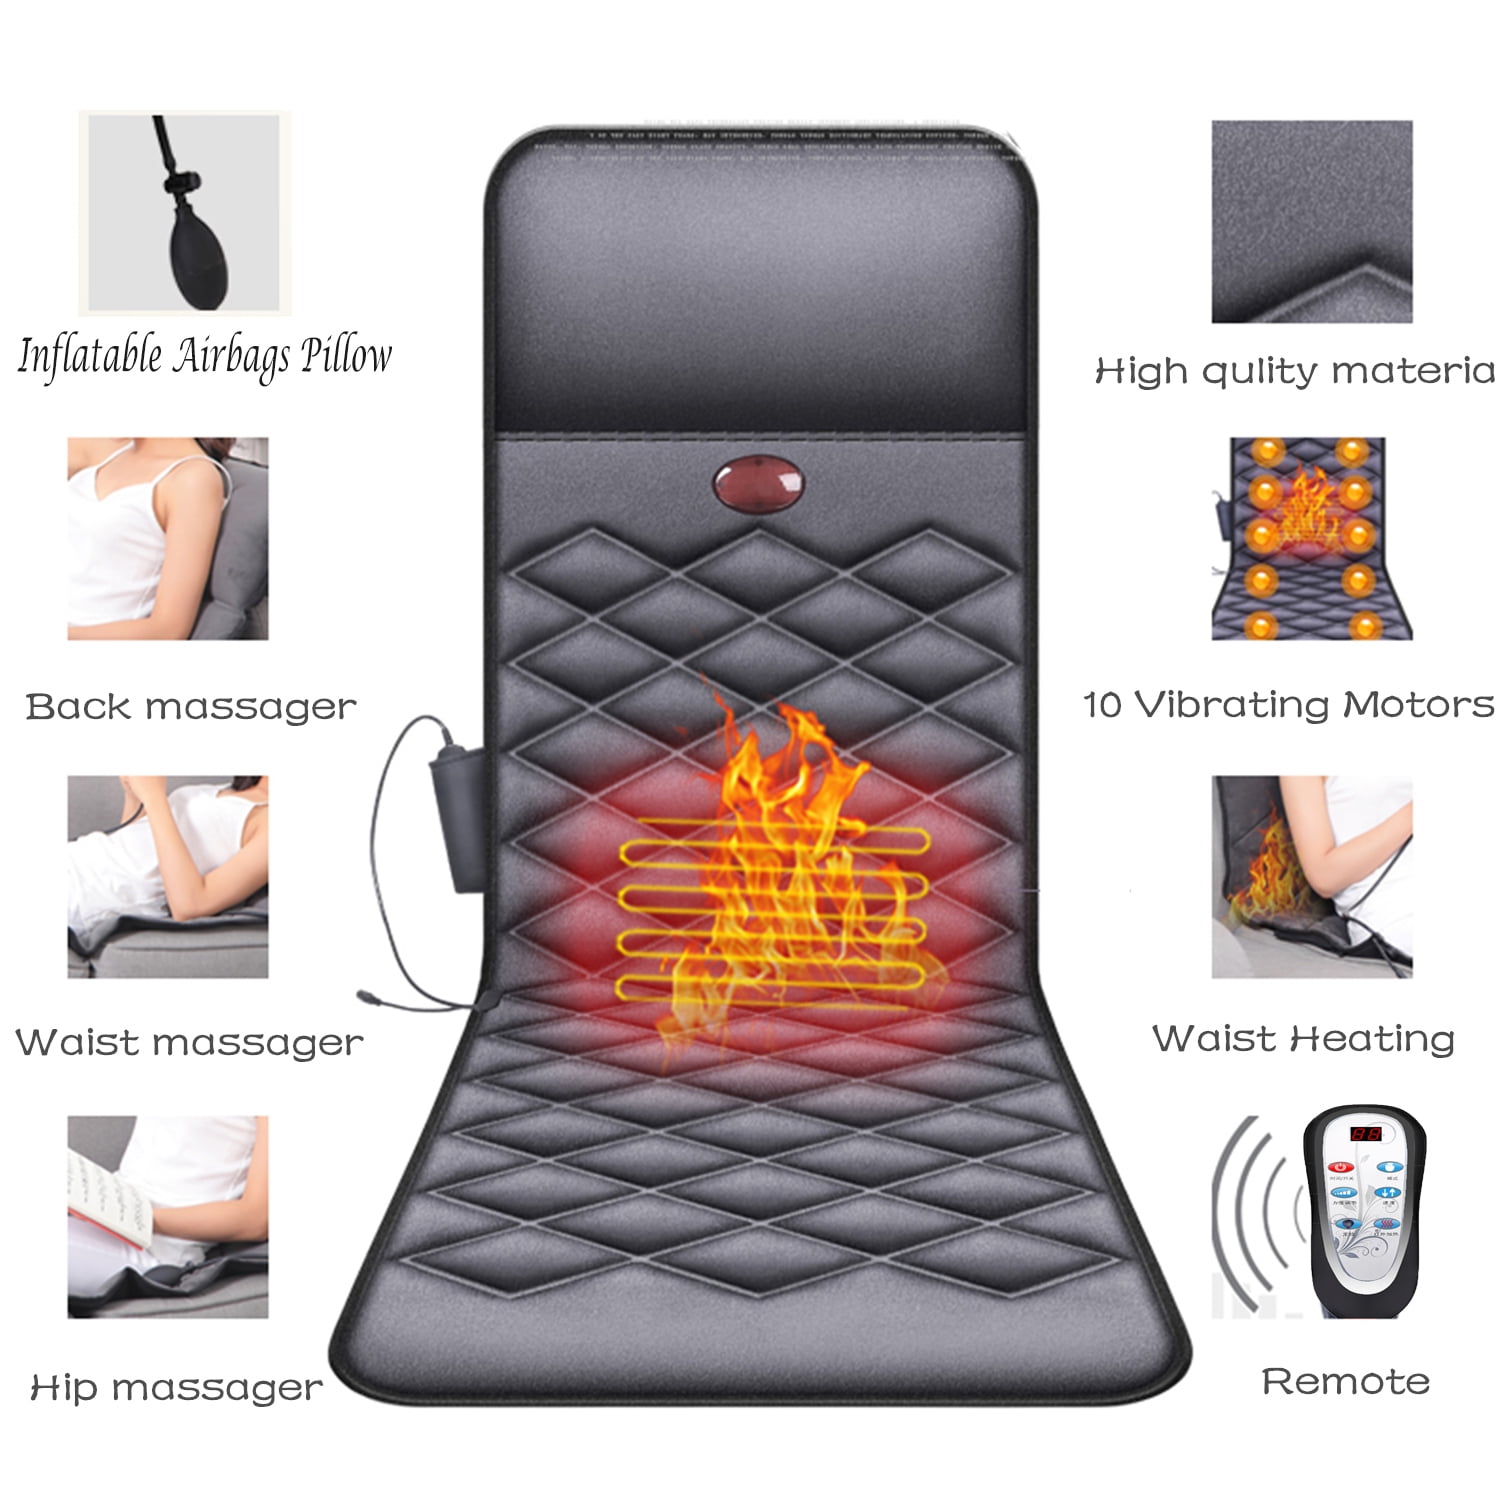 uitlaat hamer cap iMeshbean Electric Massage Mattress for Full Body with Inflatable Airbags -  Massage Pad 10 Vibration Motors Therapy Heating Cushion Massager Neck  Shoulder Back Massage with Heat Function - Walmart.com